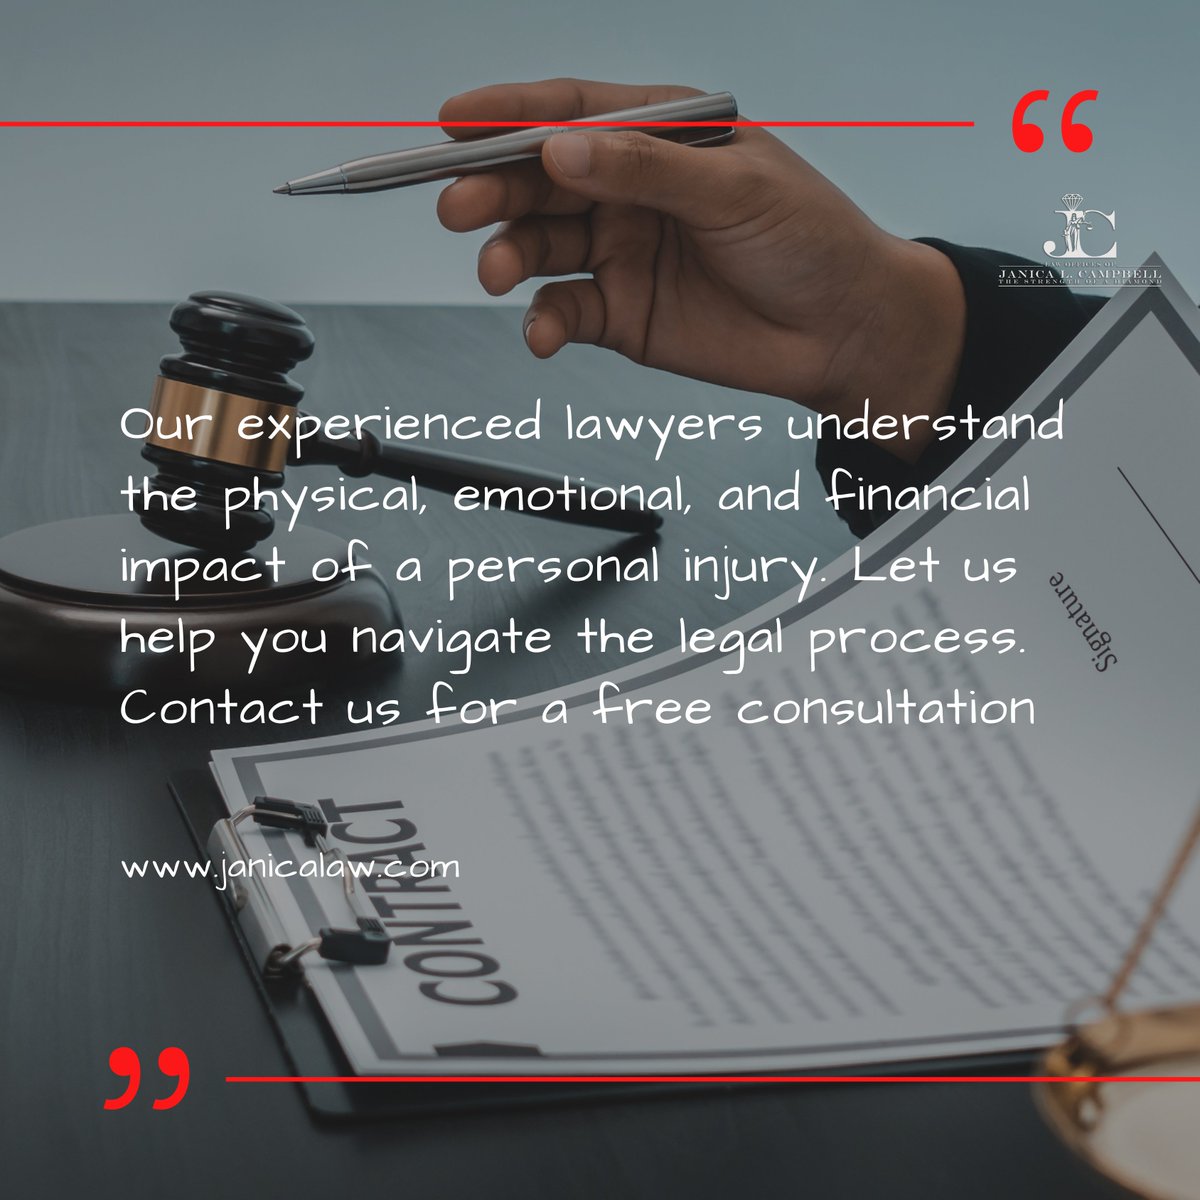 🔒💼 Our experienced lawyers understand the physical, emotional, and financial impact of a personal injury. Let us help you navigate the legal process.
.
👉 𝐕𝐢𝐬𝐢𝐭 𝐍𝐨𝐰, 𝐋𝐢𝐧𝐤 𝐈𝐧 𝐁𝐢𝐨.
👉 𝑭𝒐𝒓 𝑴𝒐𝒓𝒆, 𝑭𝒐𝒍𝒍𝒐𝒘 @janica_law
.
#PersonalInjuryLawyers #LegalAdvice